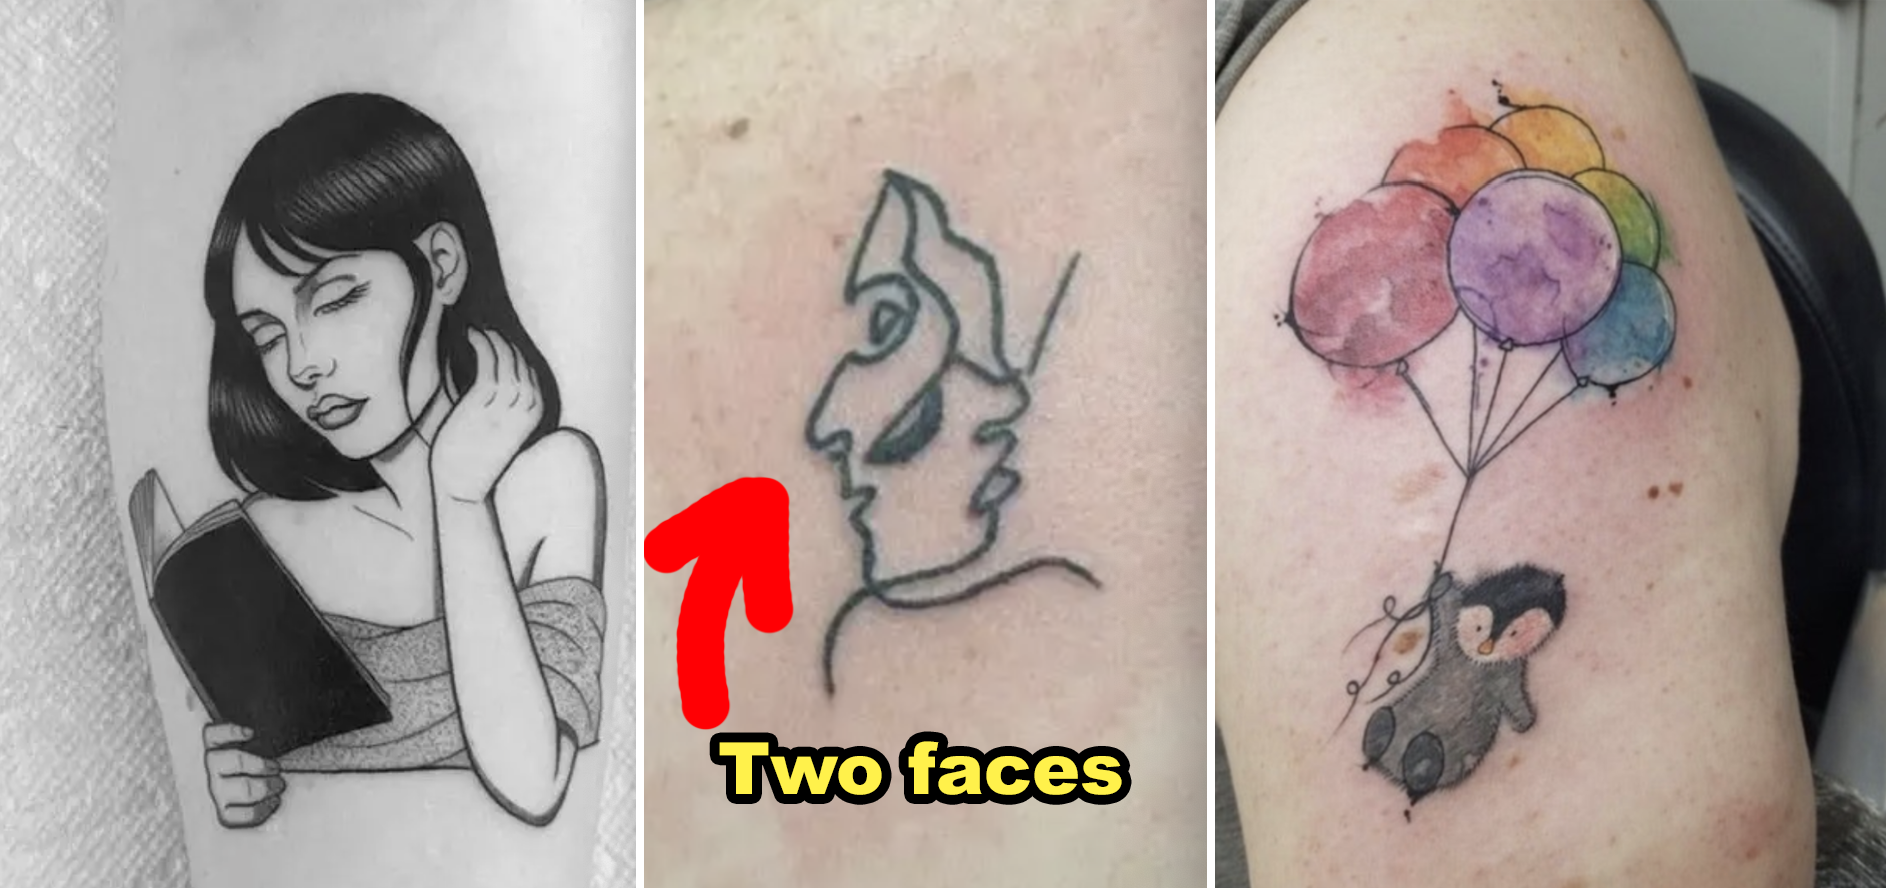 210 Unique Tattoo Ideas You'll Actually Like